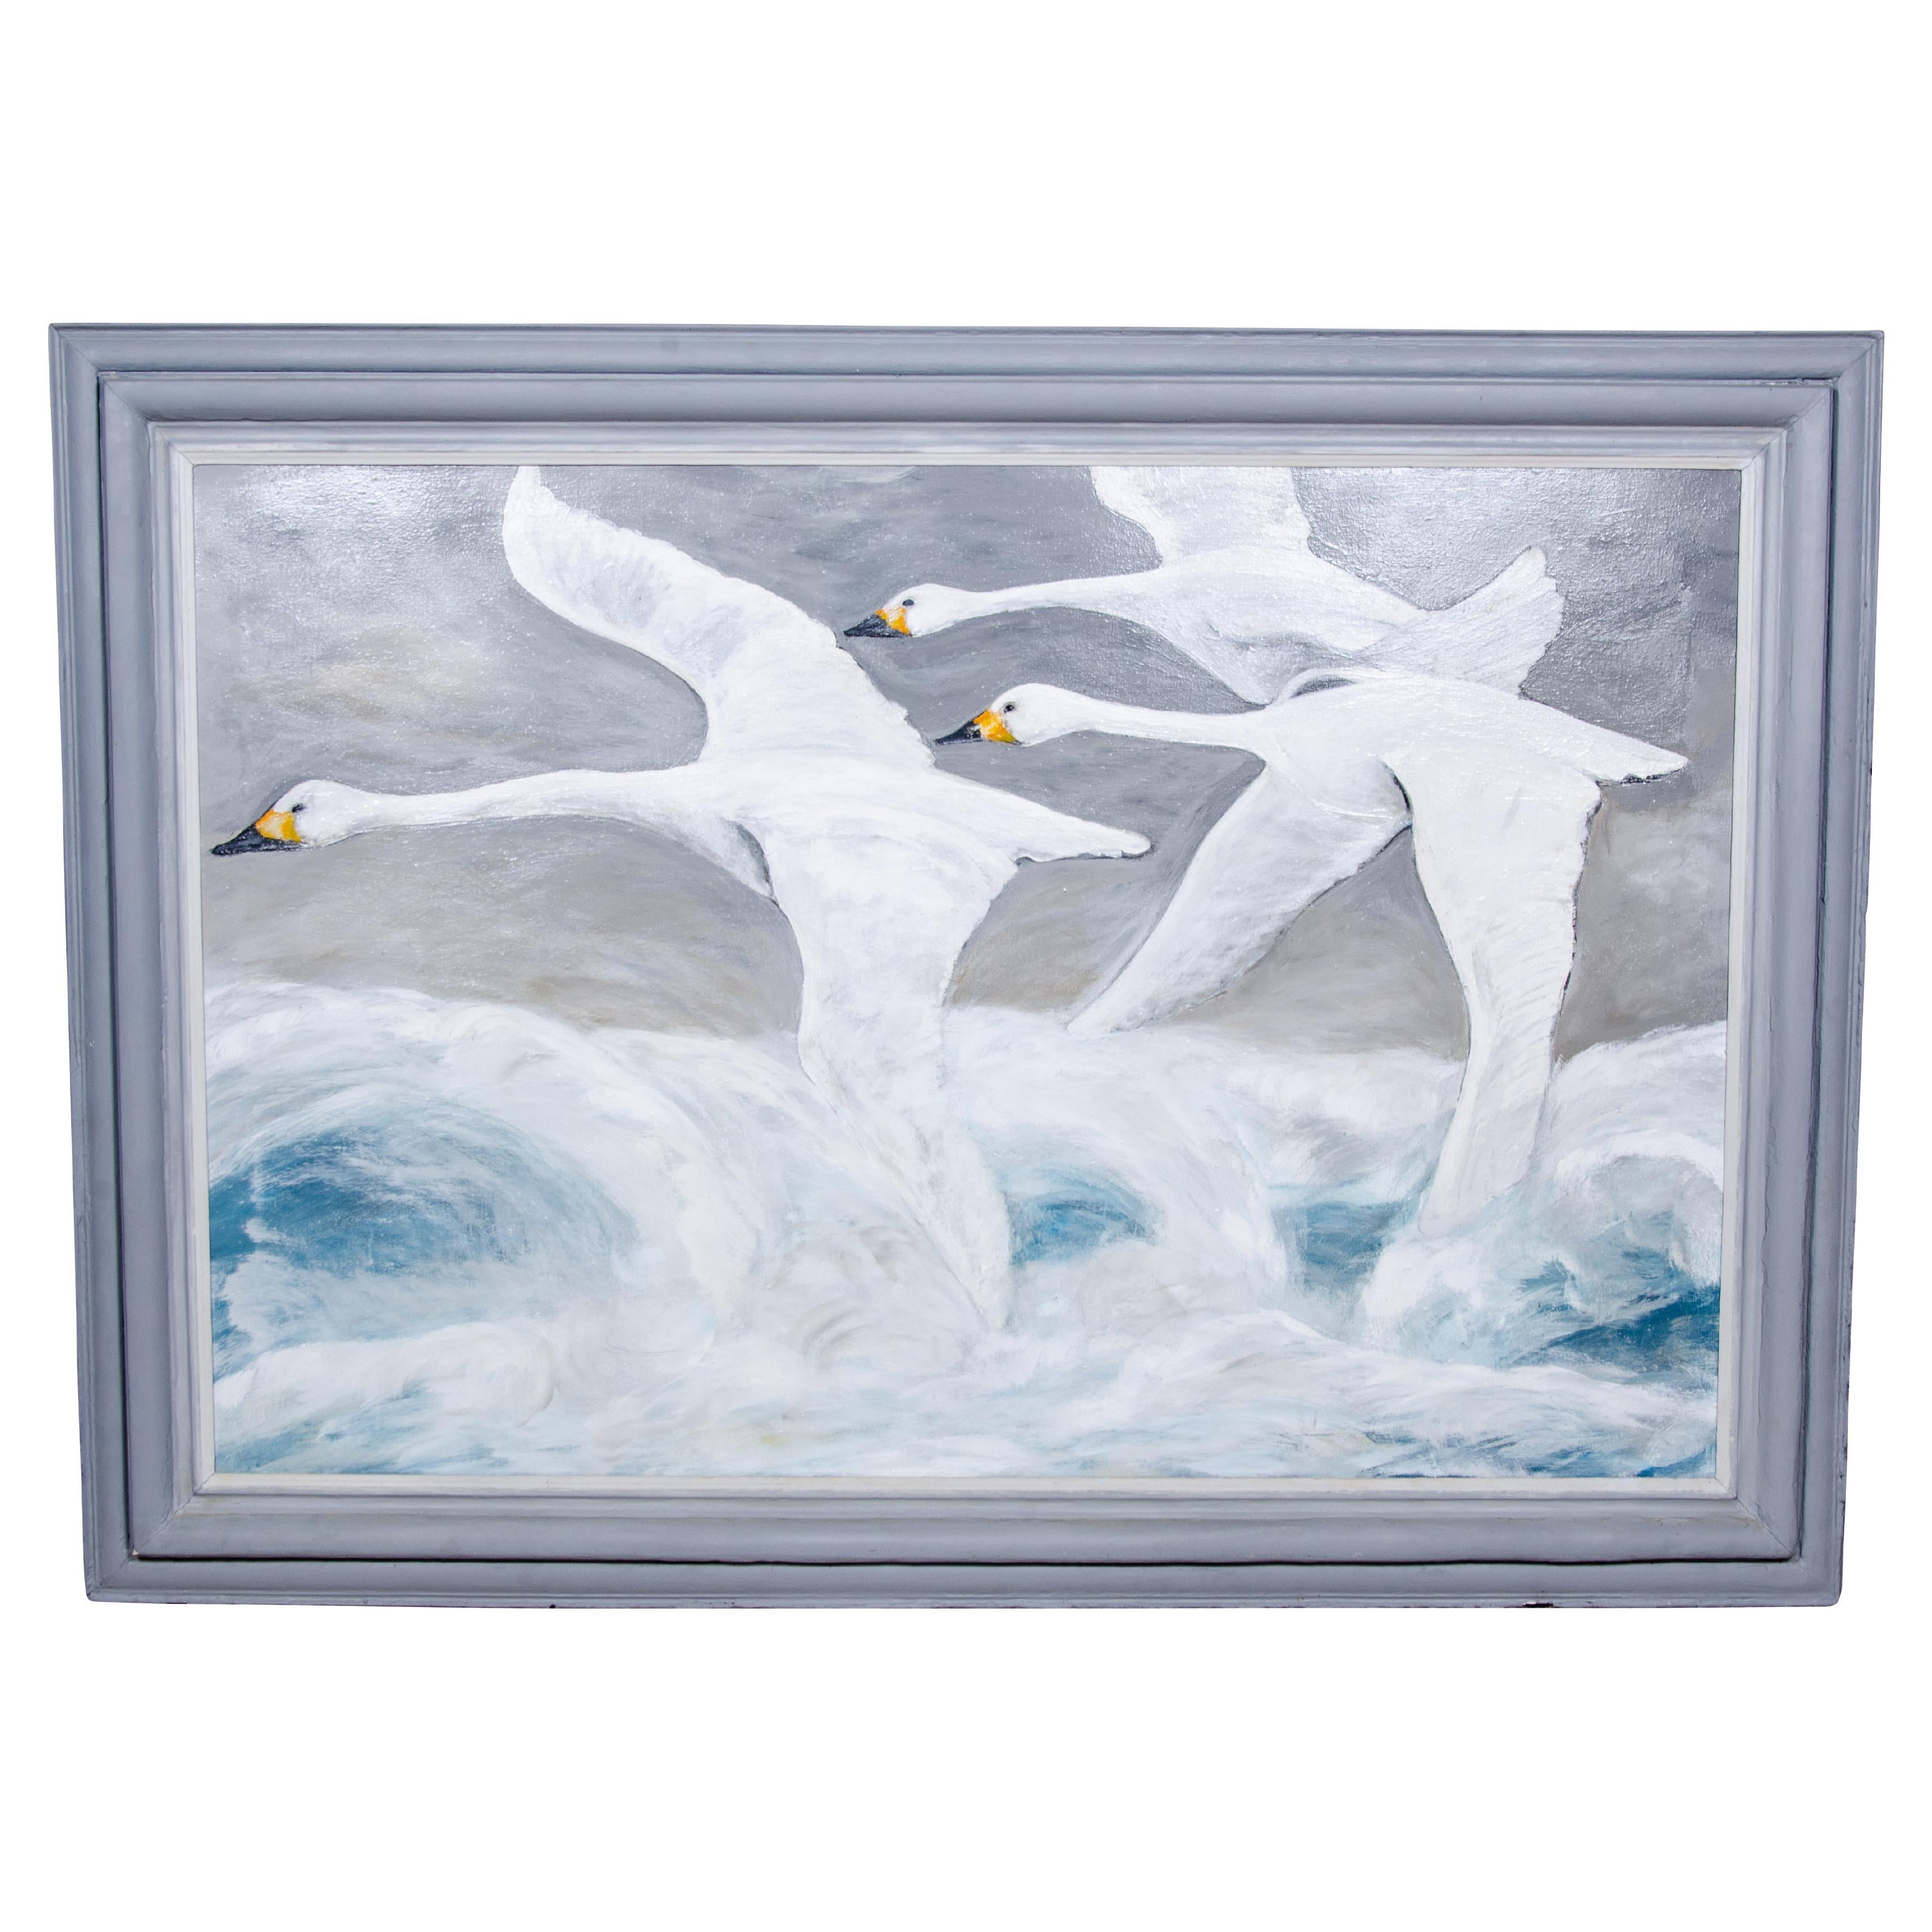 William Chewning Oil on Canvas Painting of Flying Swans